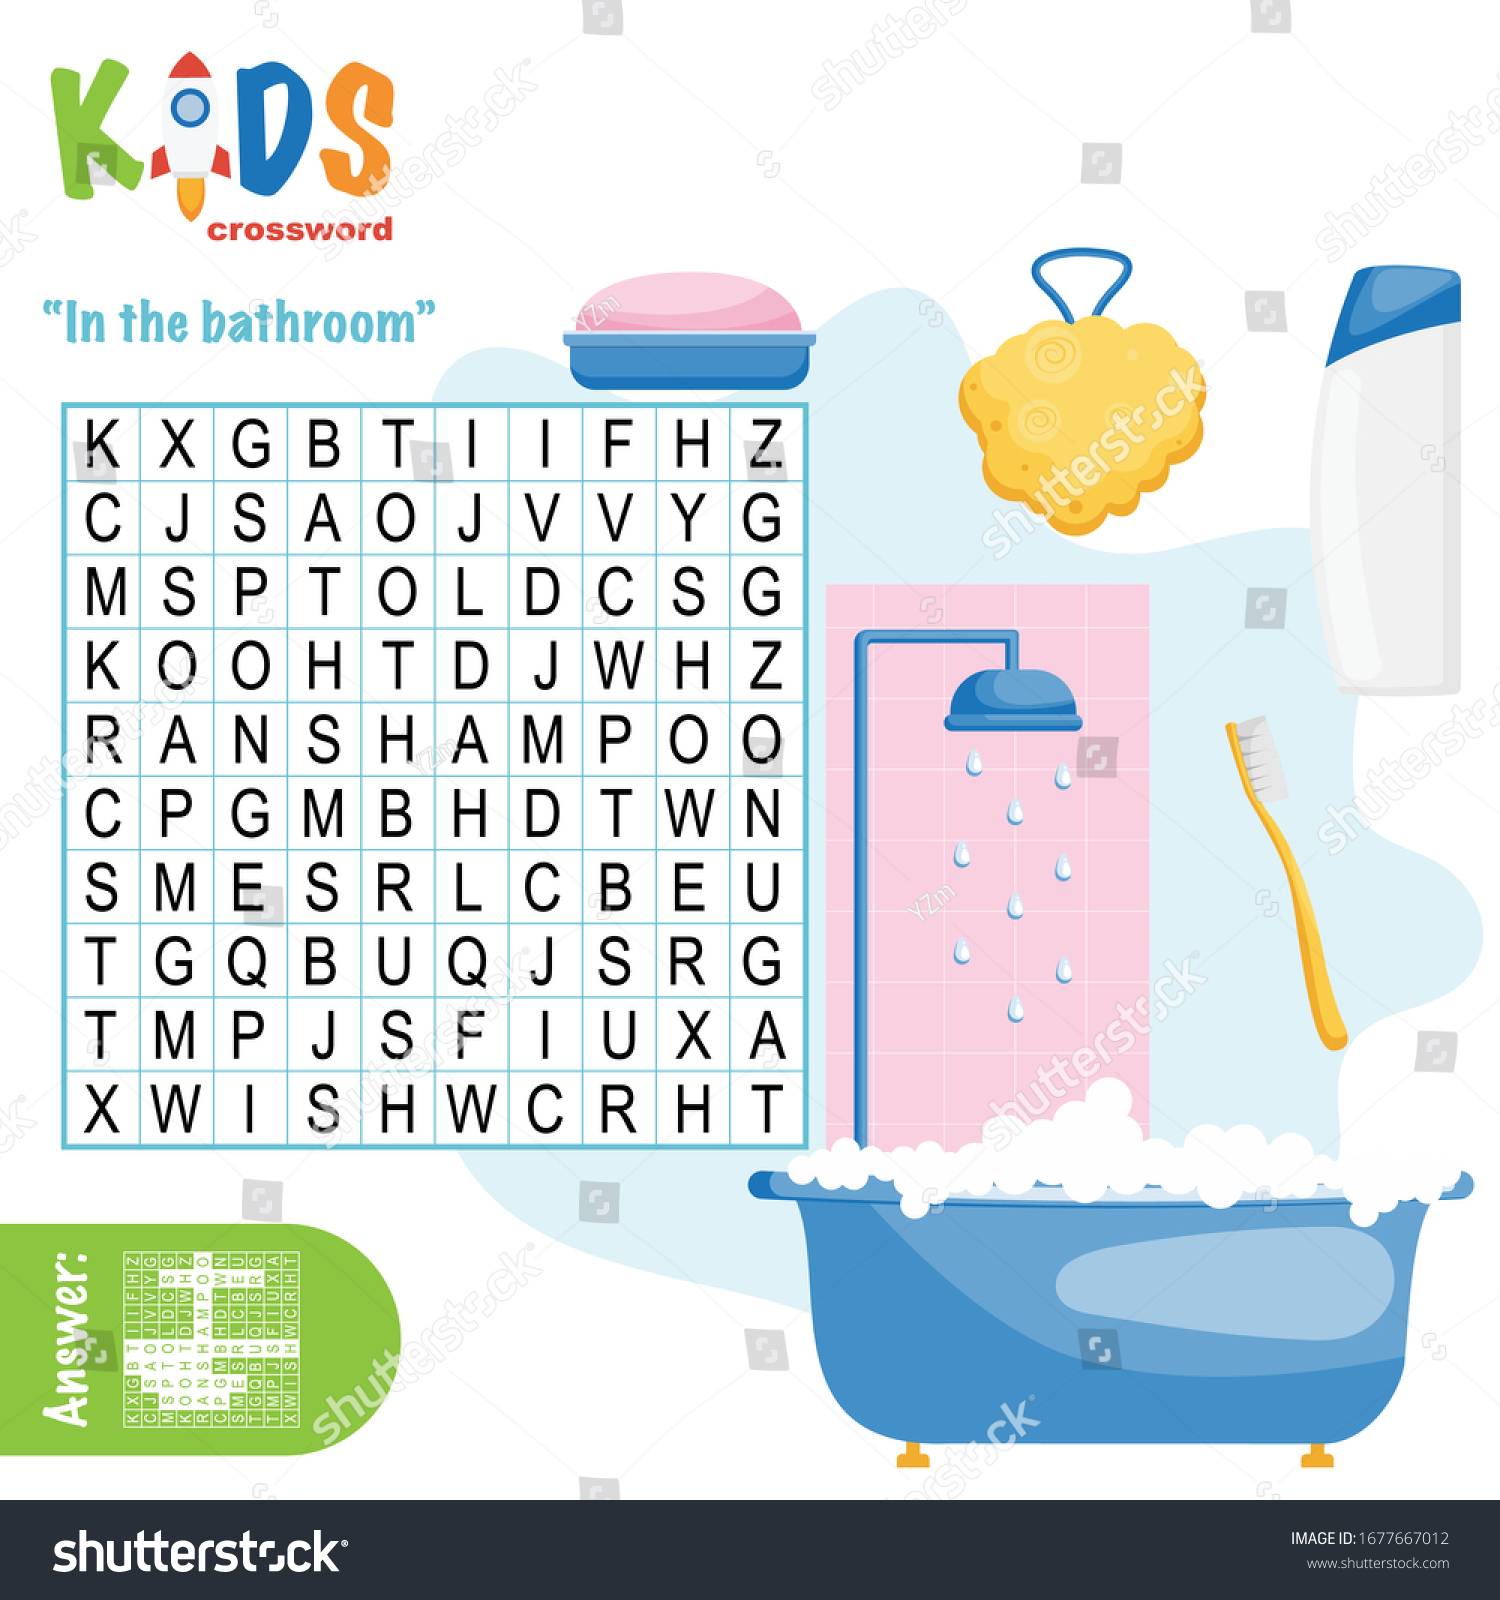 SVG of Easy word search crossword puzzle 'In the bathroom', for children in elementary and middle school. Fun way to practice language comprehension and expand vocabulary. Includes answers. svg